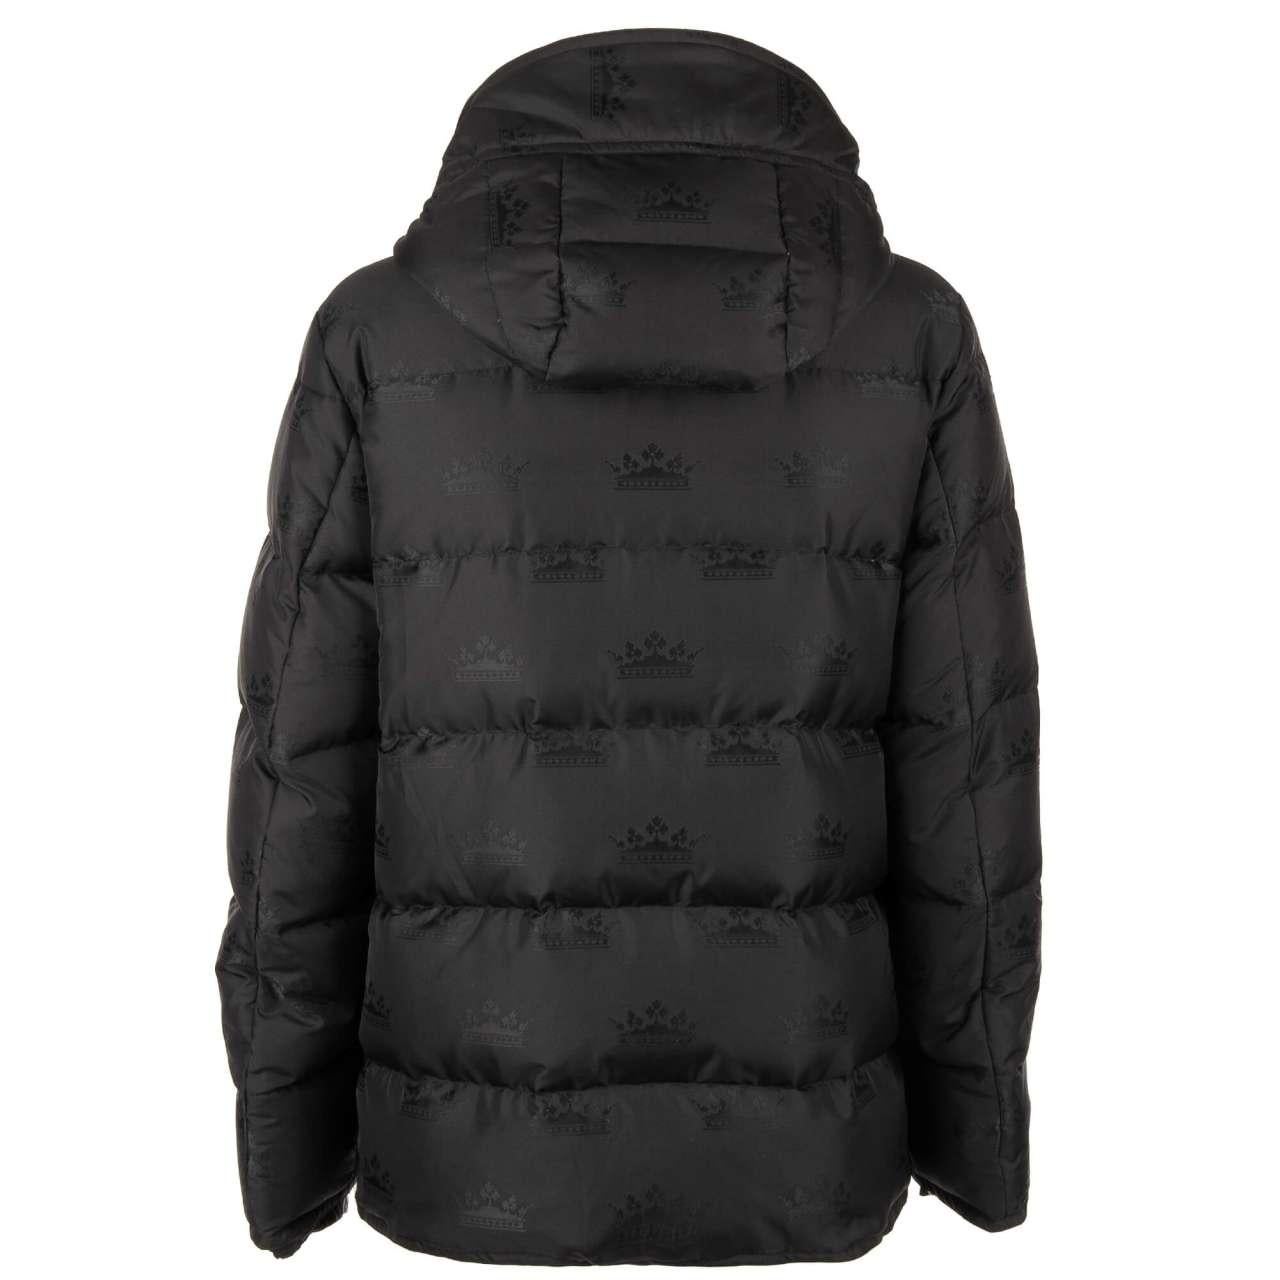 - Stuffed, crowns textured down jacket with detachable hoody, knit details and pockets by DOLCE & GABBANA - Former RRP: EUR 1.750 - New with tag - Regular Fit - MADE IN ITALY - Model: G9PQ2T-HJMA8-N0000 - Material: 79% Polyester, 14% Viscose, 6%